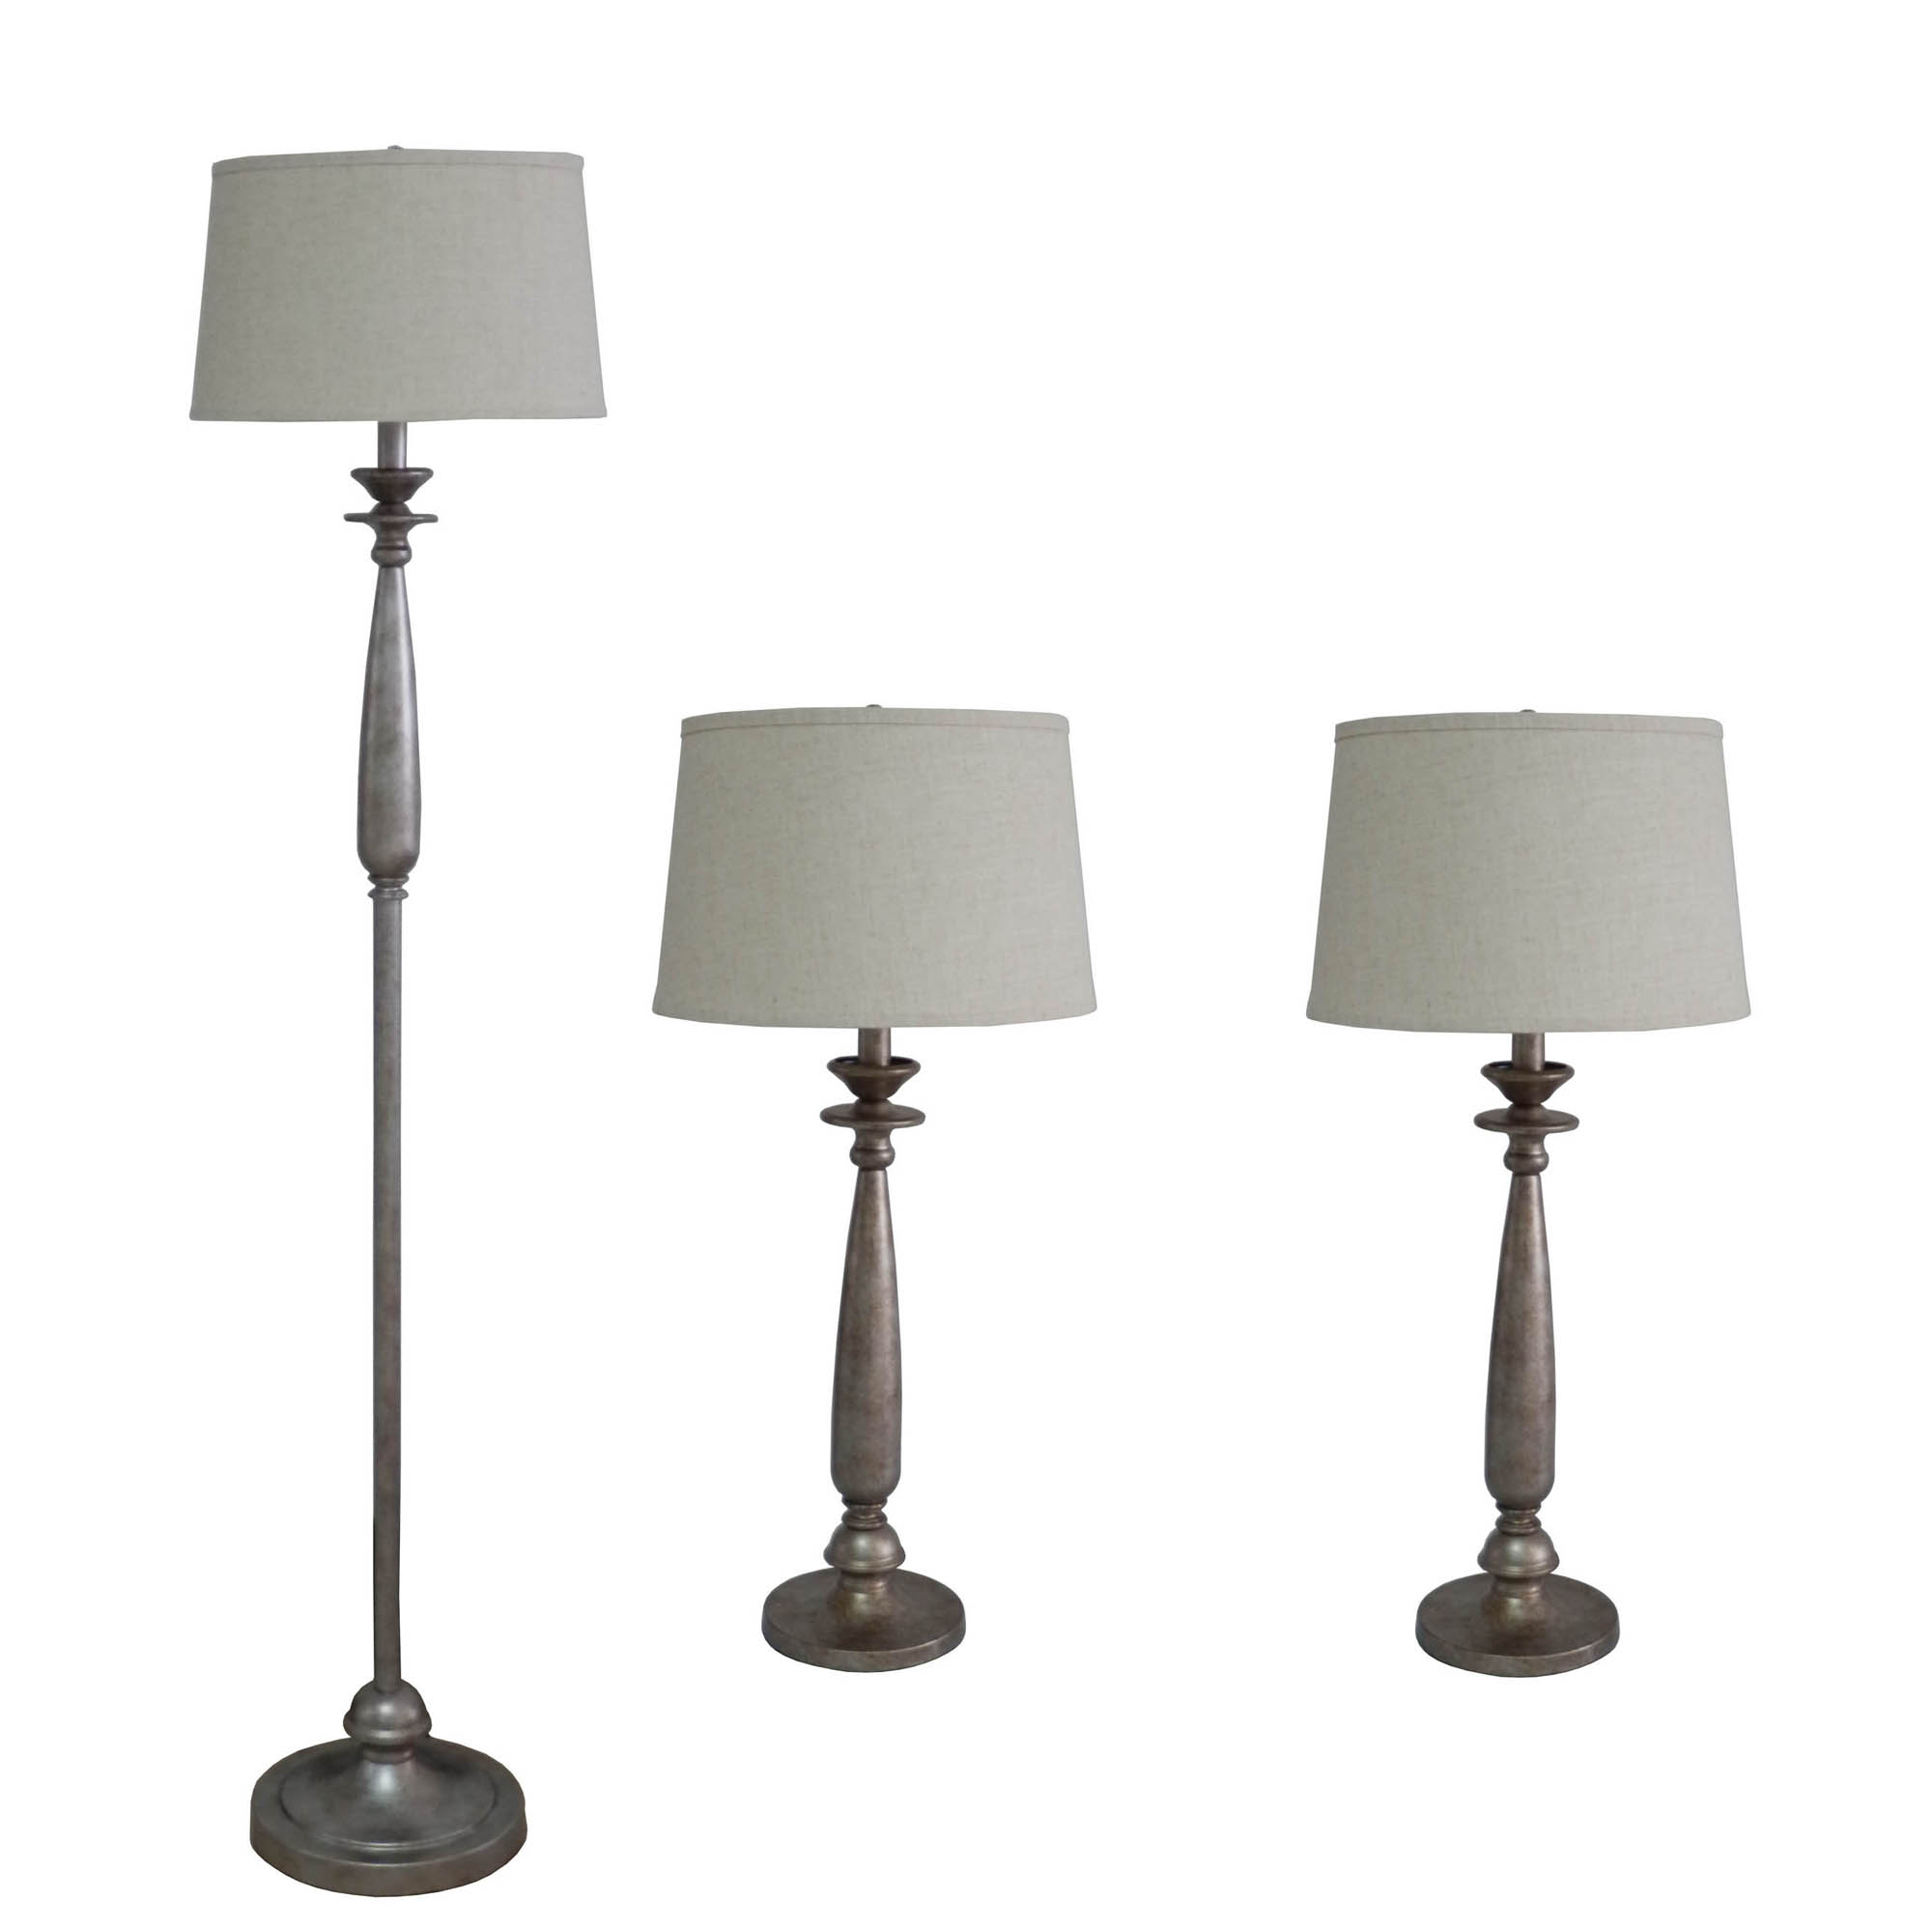 3 Piece Metal & Resin Lamp Set with Antique Silver Finish.